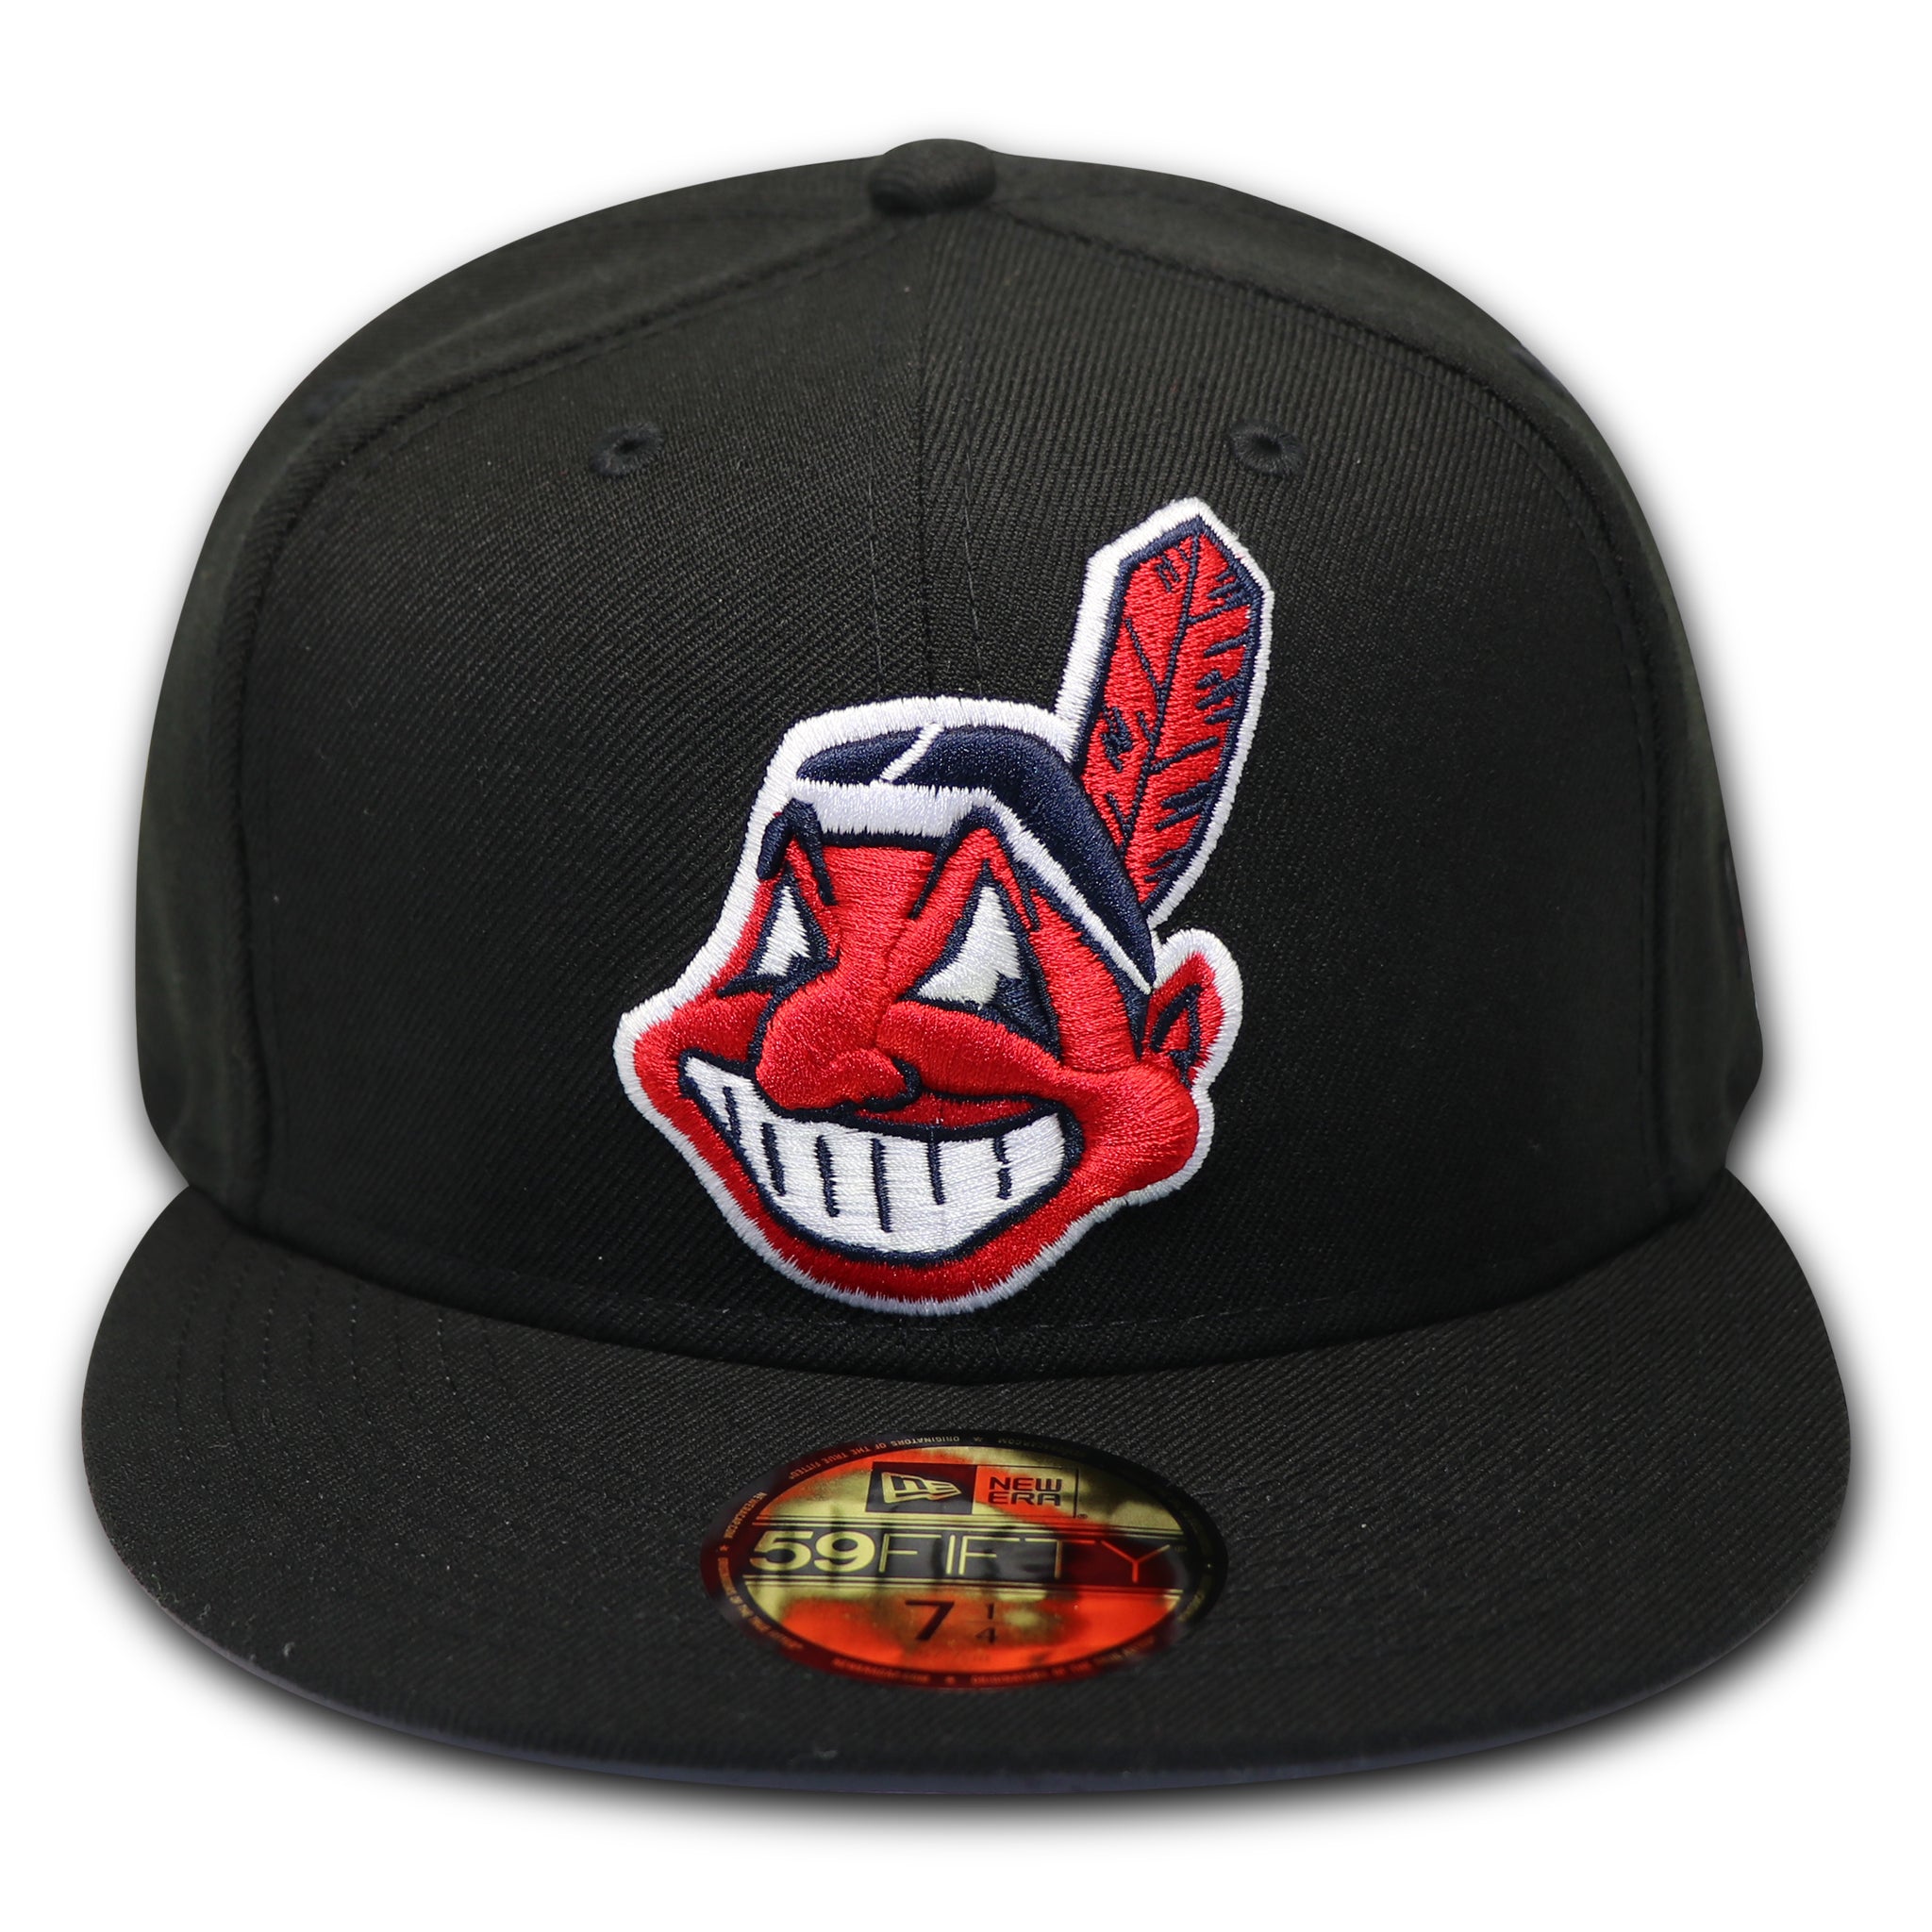 CLEVELAND INDIANS (BLACK) 59FIFTY FITTED